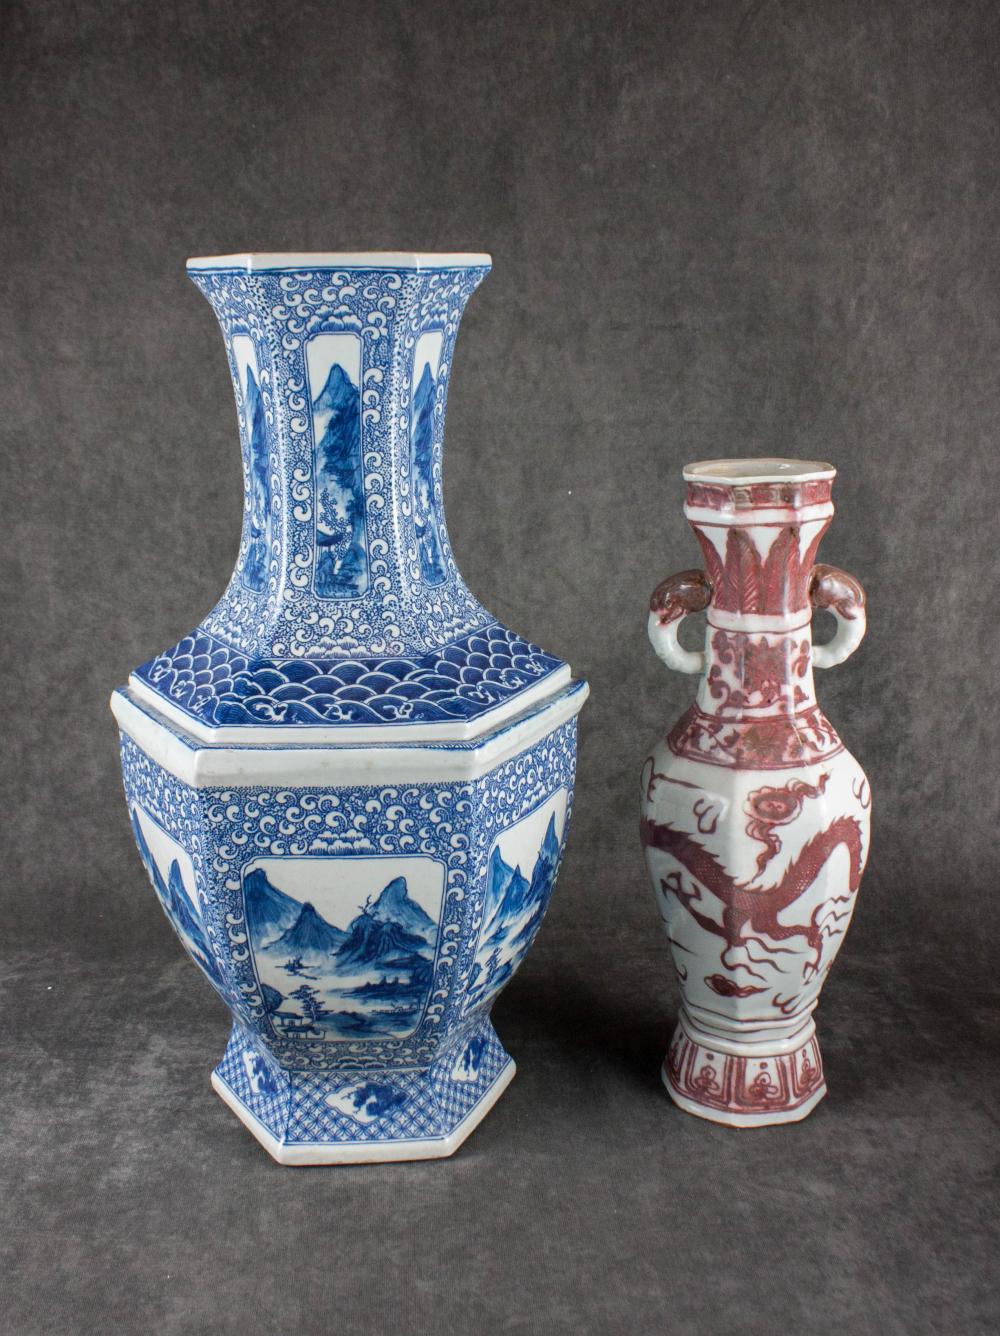 TWO CHINESE PORCELAIN VASESTWO 3c7ccf